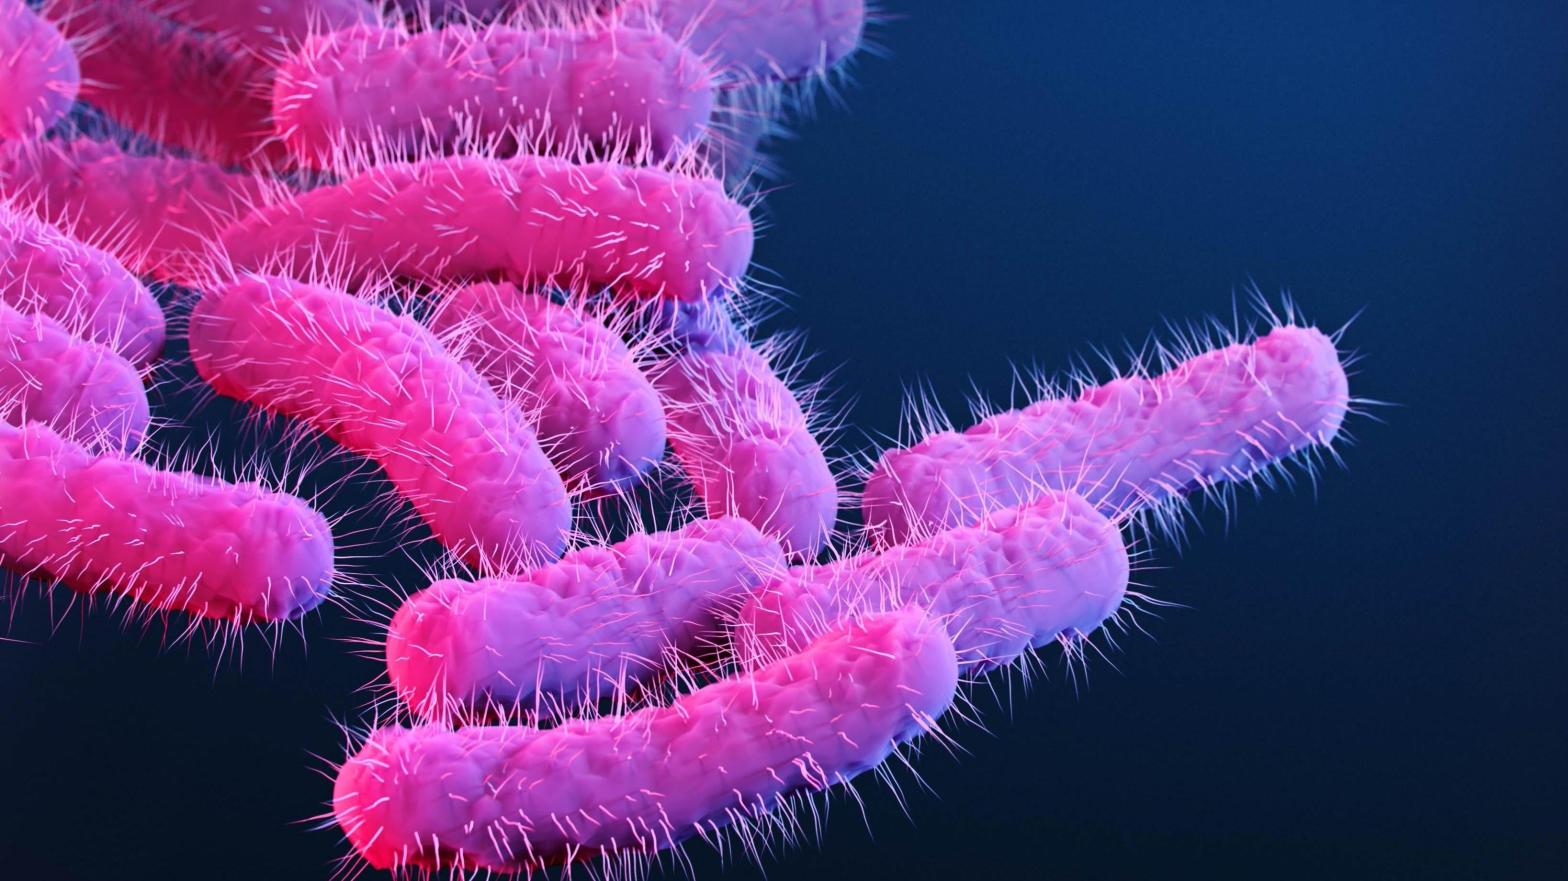 These demented-looking hot dogs are an illustration of Shigella bacteria. (Illustration: Stephanie Rossow/CDC)